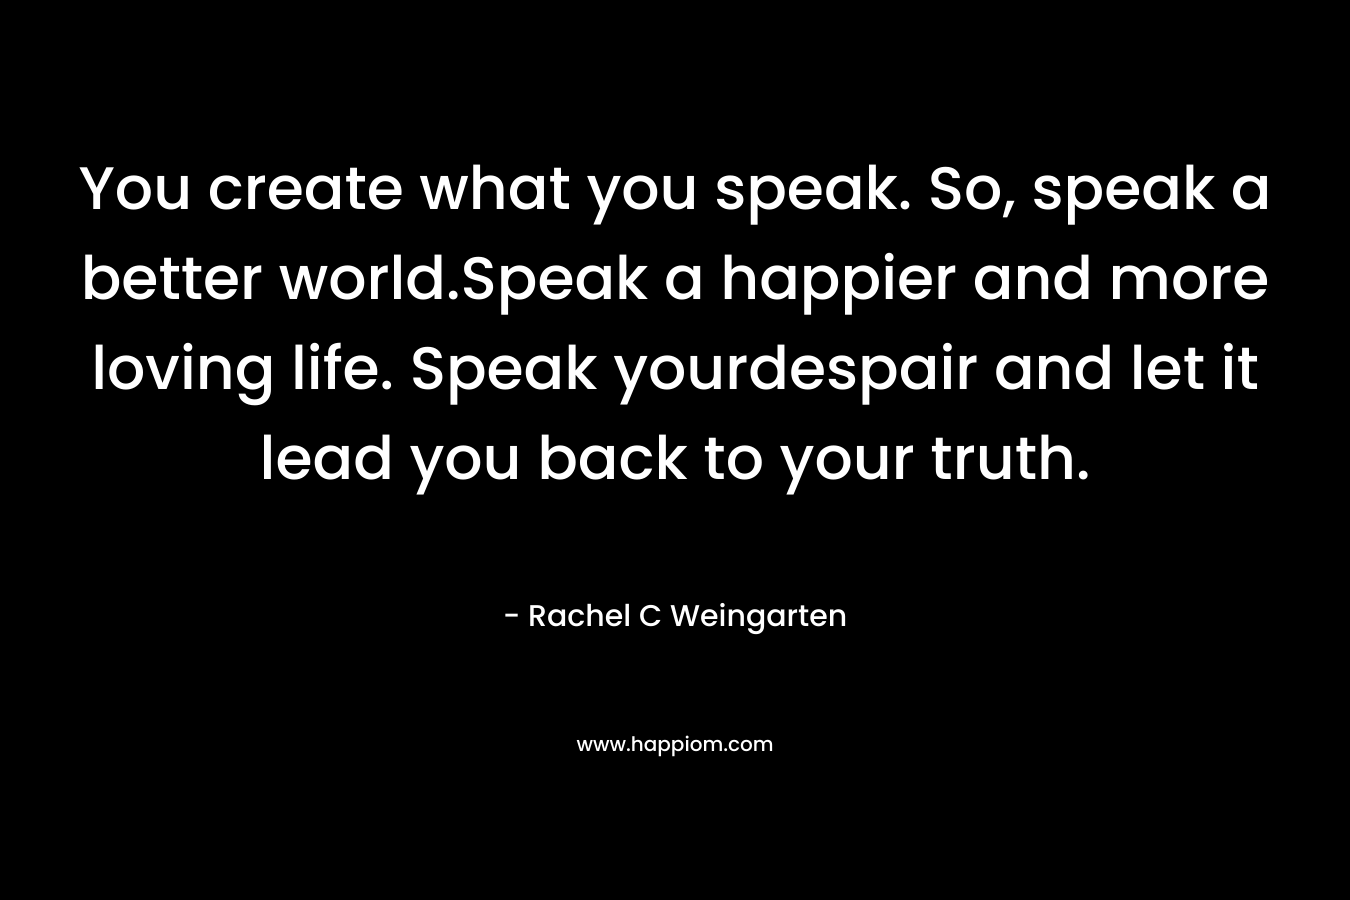 You create what you speak. So, speak a better world.Speak a happier and more loving life. Speak yourdespair and let it lead you back to your truth. – Rachel C Weingarten